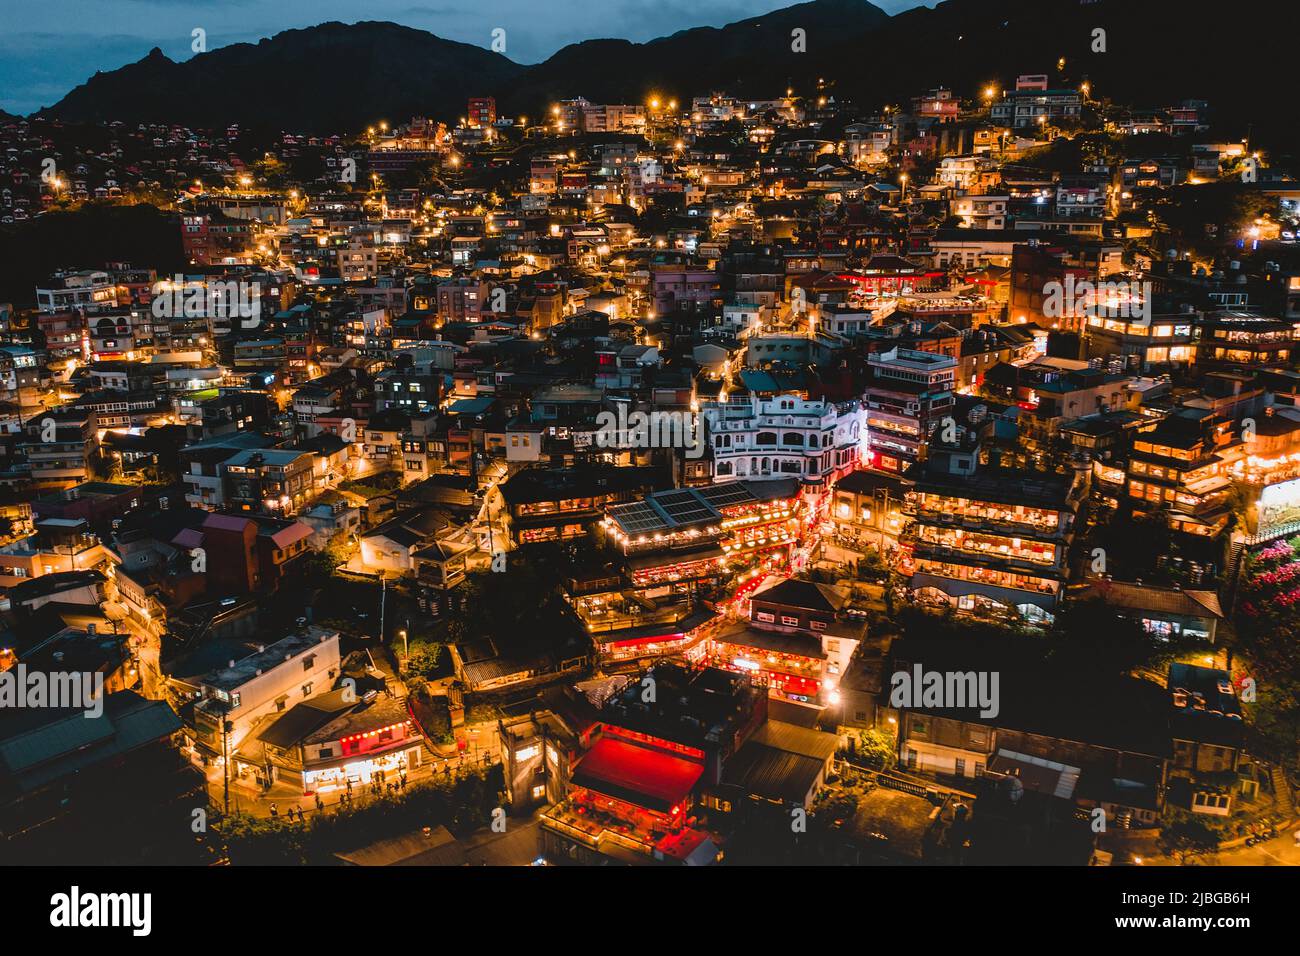 aerial view of night scene of Jioufen village, Taiwan. The colourful scene at night of Jiufen old city, Jiufen, Taiwan. Stock Photo